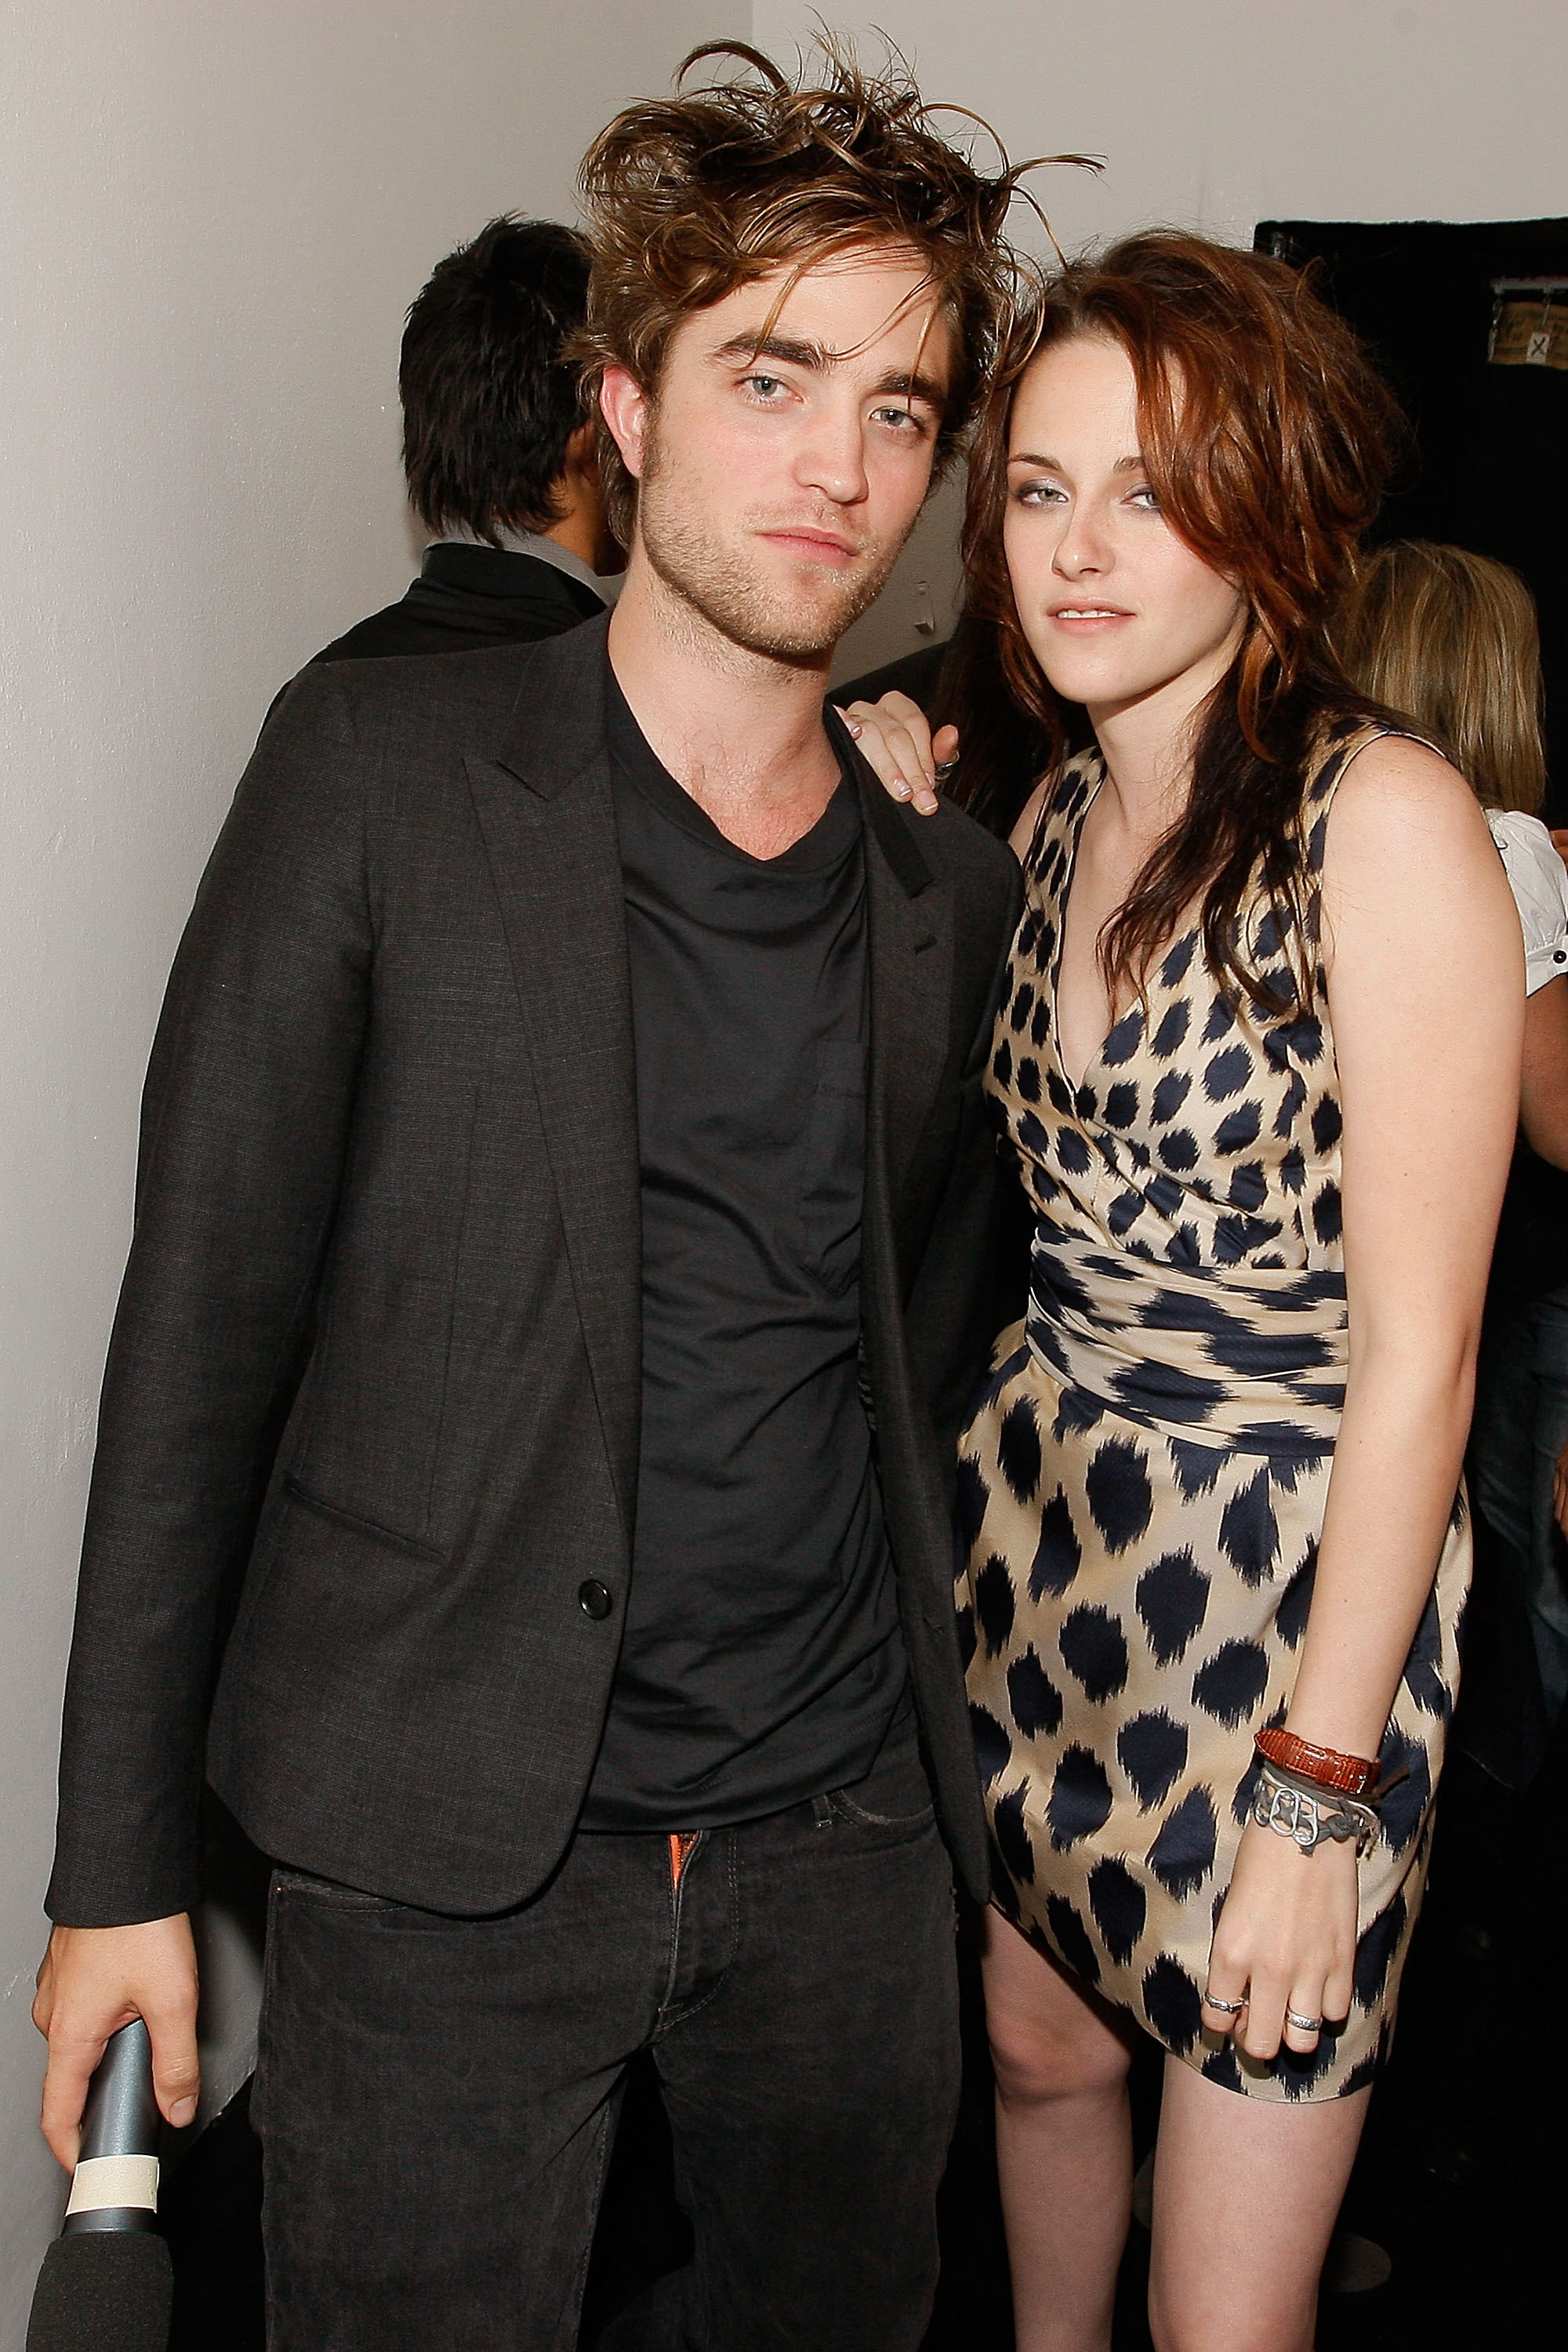 Robert Pattinson Looked Hot In A Black Ensemble While